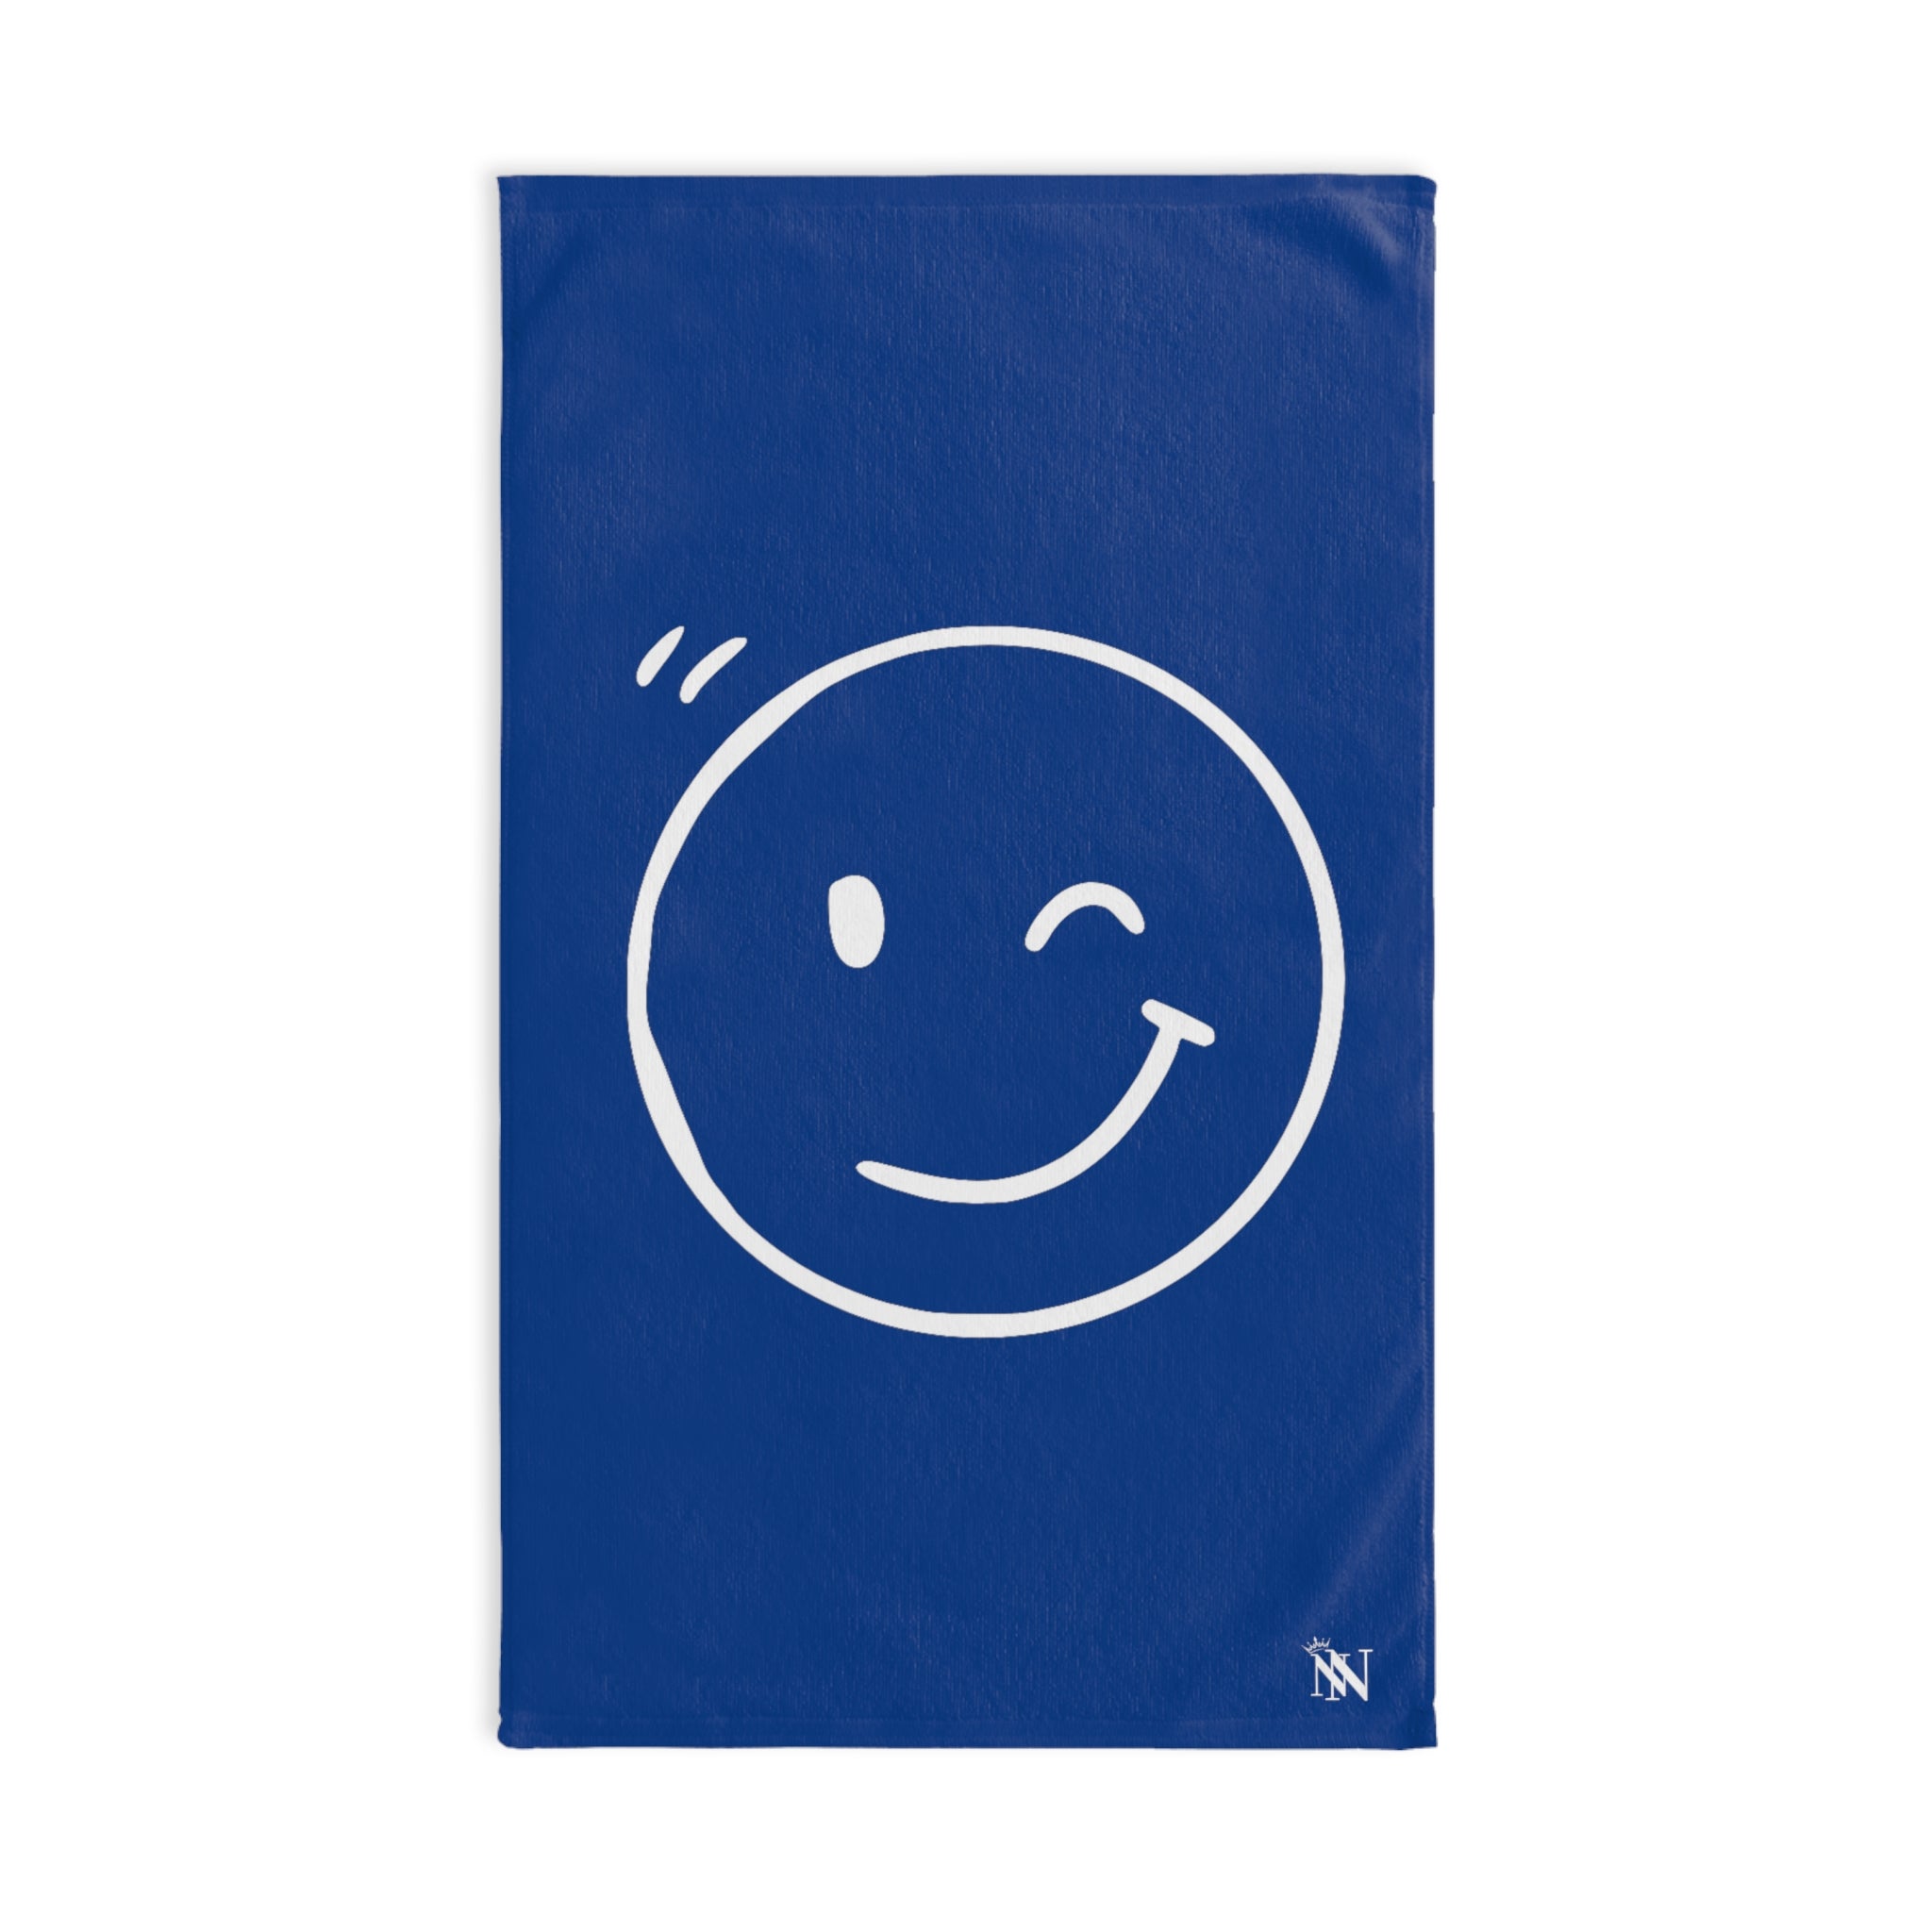 Emoji  Wink  Blue | Gifts for Boyfriend, Funny Towel Romantic Gift for Wedding Couple Fiance First Year Anniversary Valentines, Party Gag Gifts, Joke Humor Cloth for Husband Men BF NECTAR NAPKINS